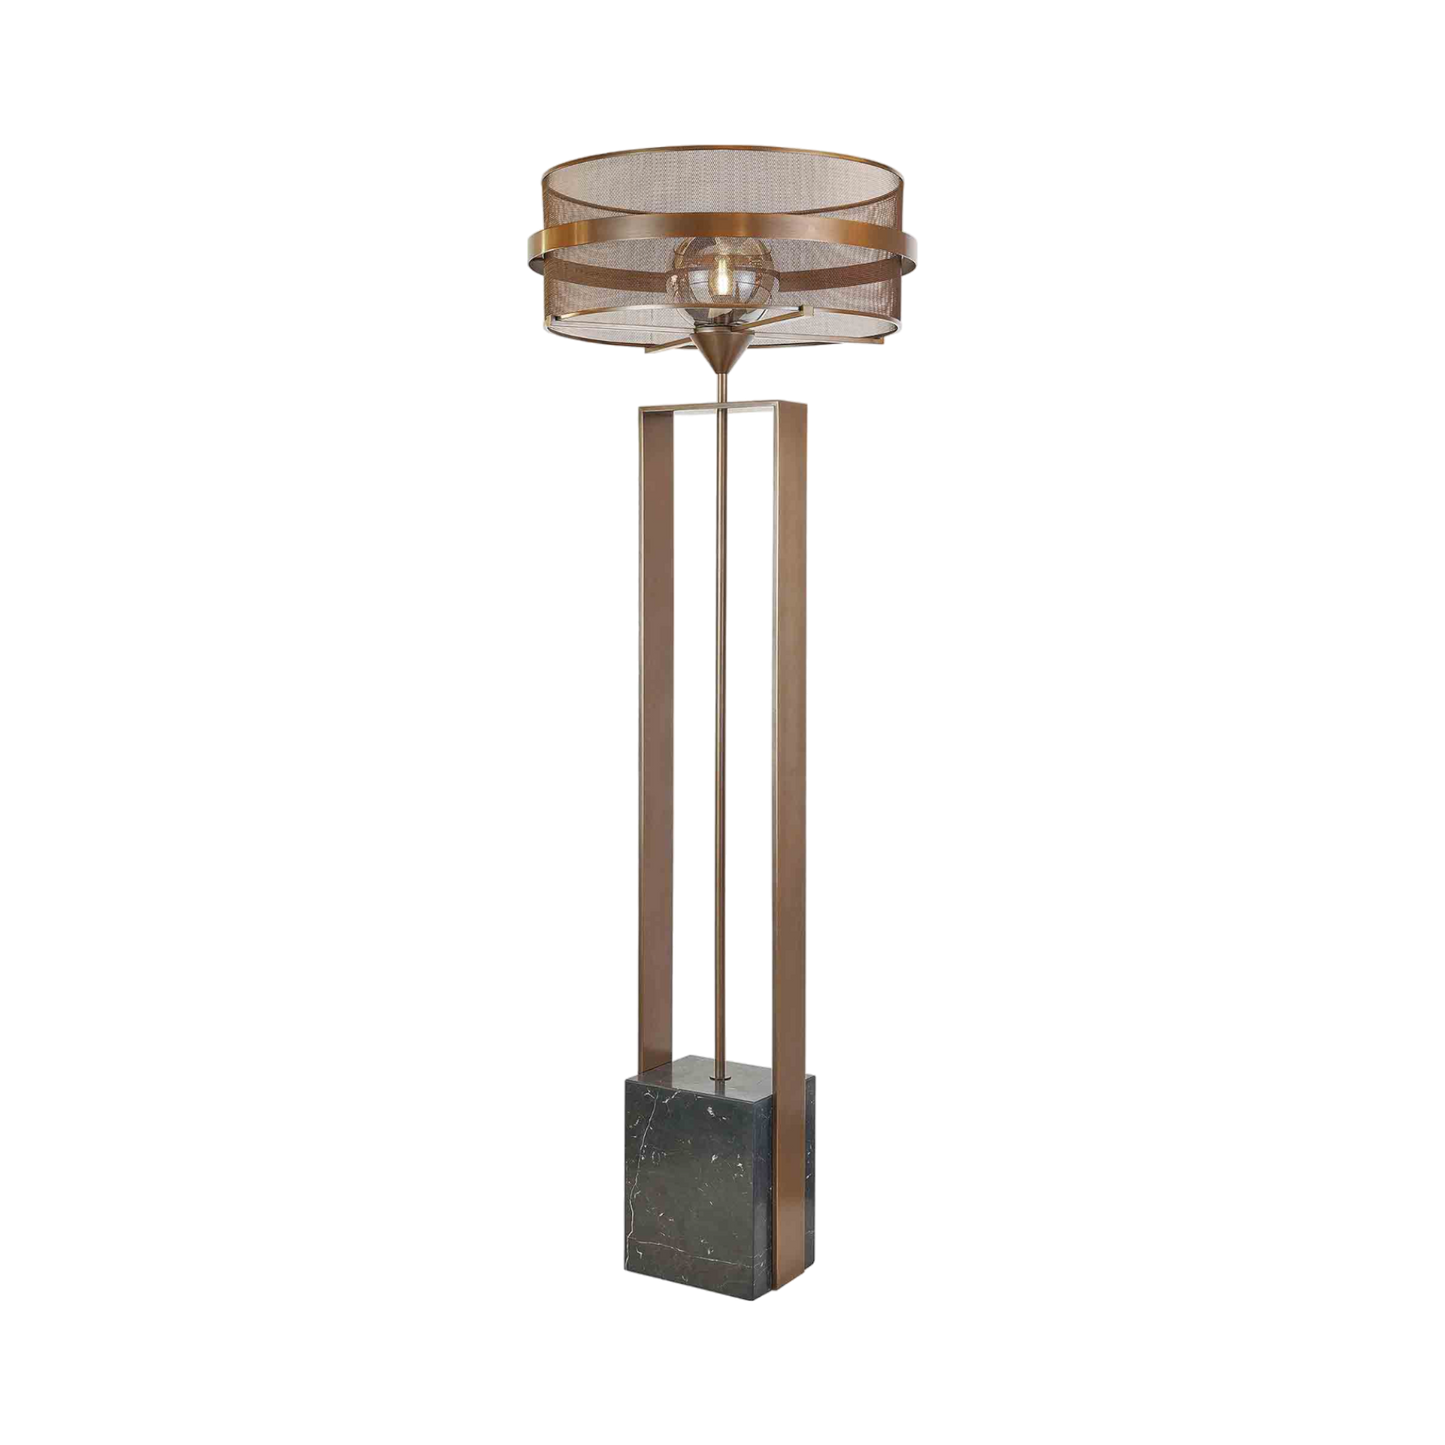 Square Marble Lamp With Stainless Steel Support And Shade  70X200 Cm